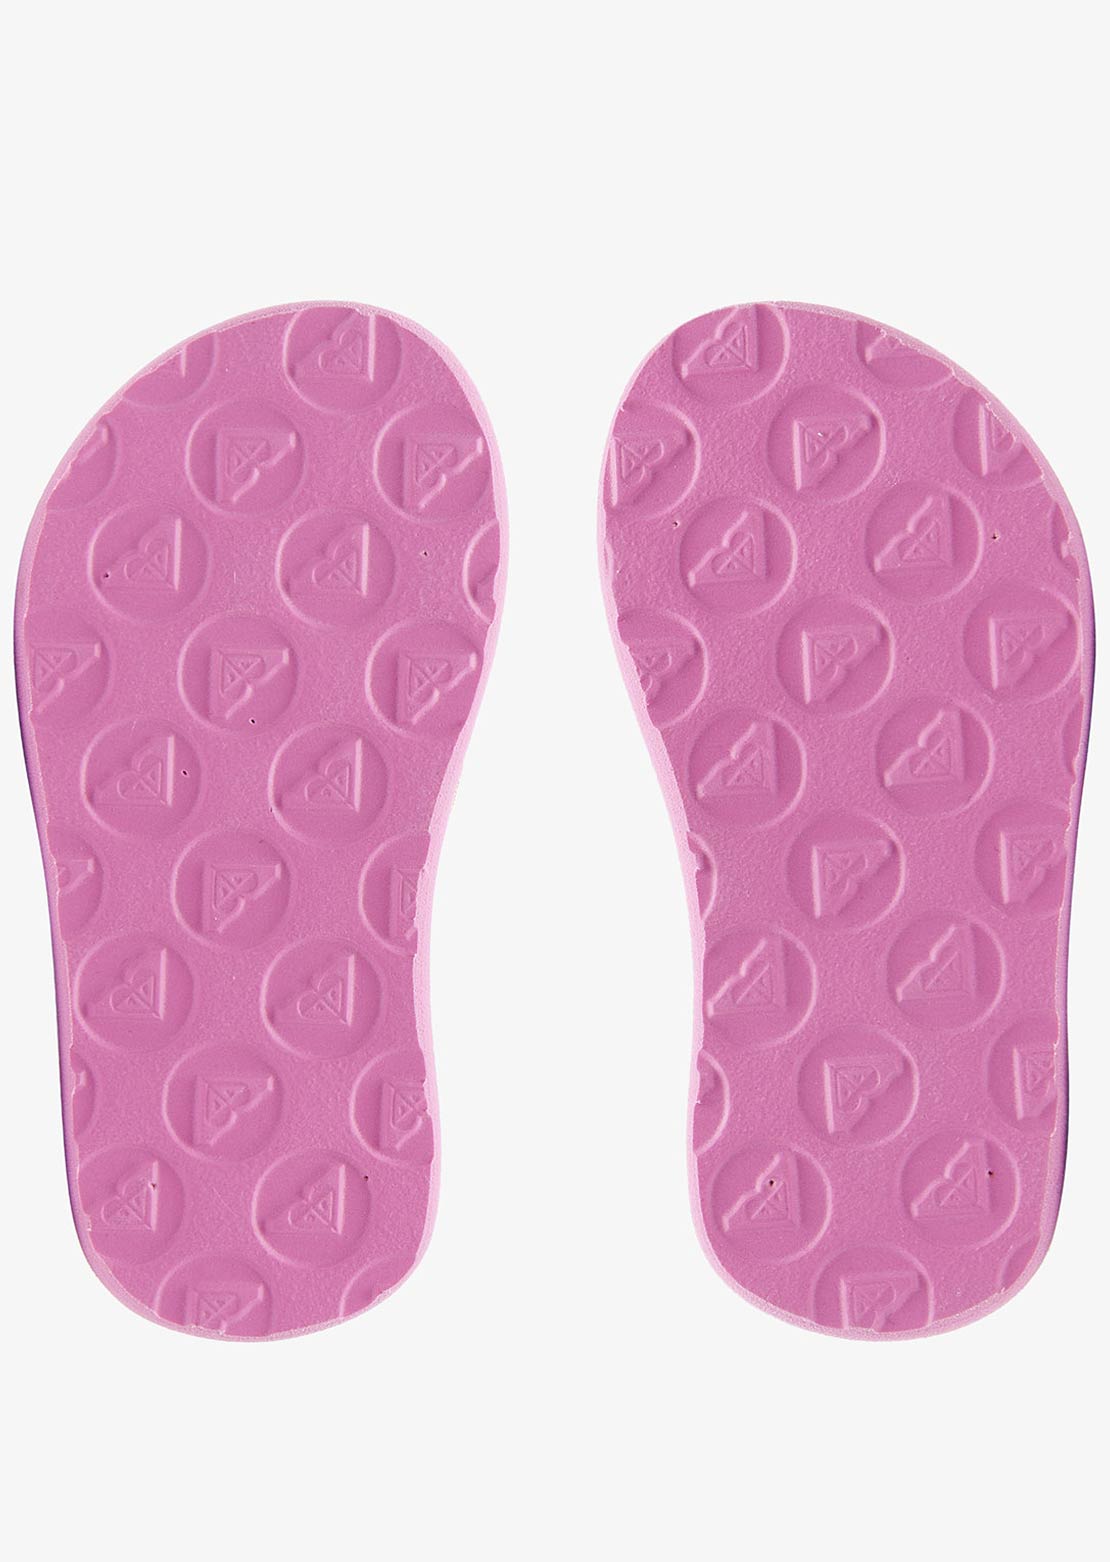 Roxy Toddler TW Roxy Cage Sandals Super Pink